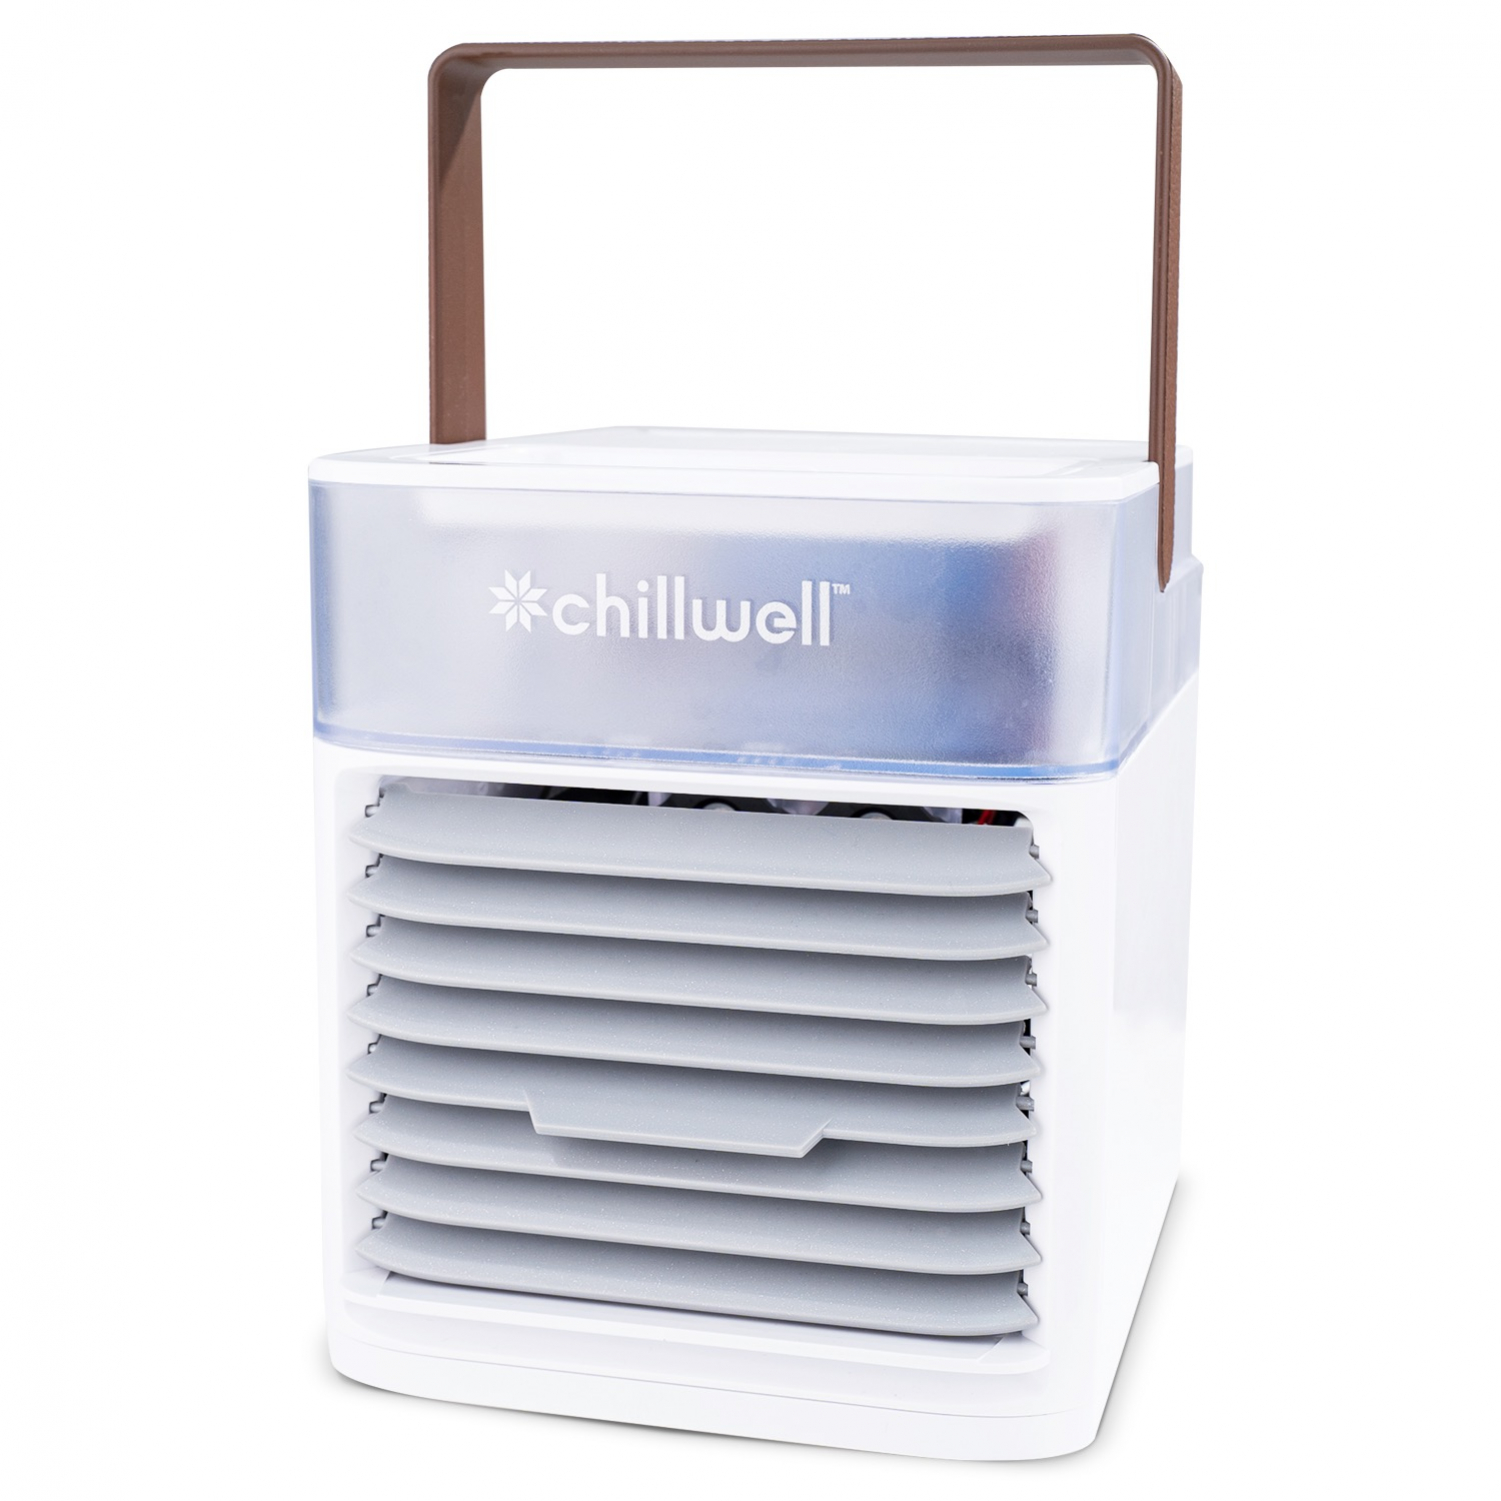 How Does Chillwell Ac Fan Work